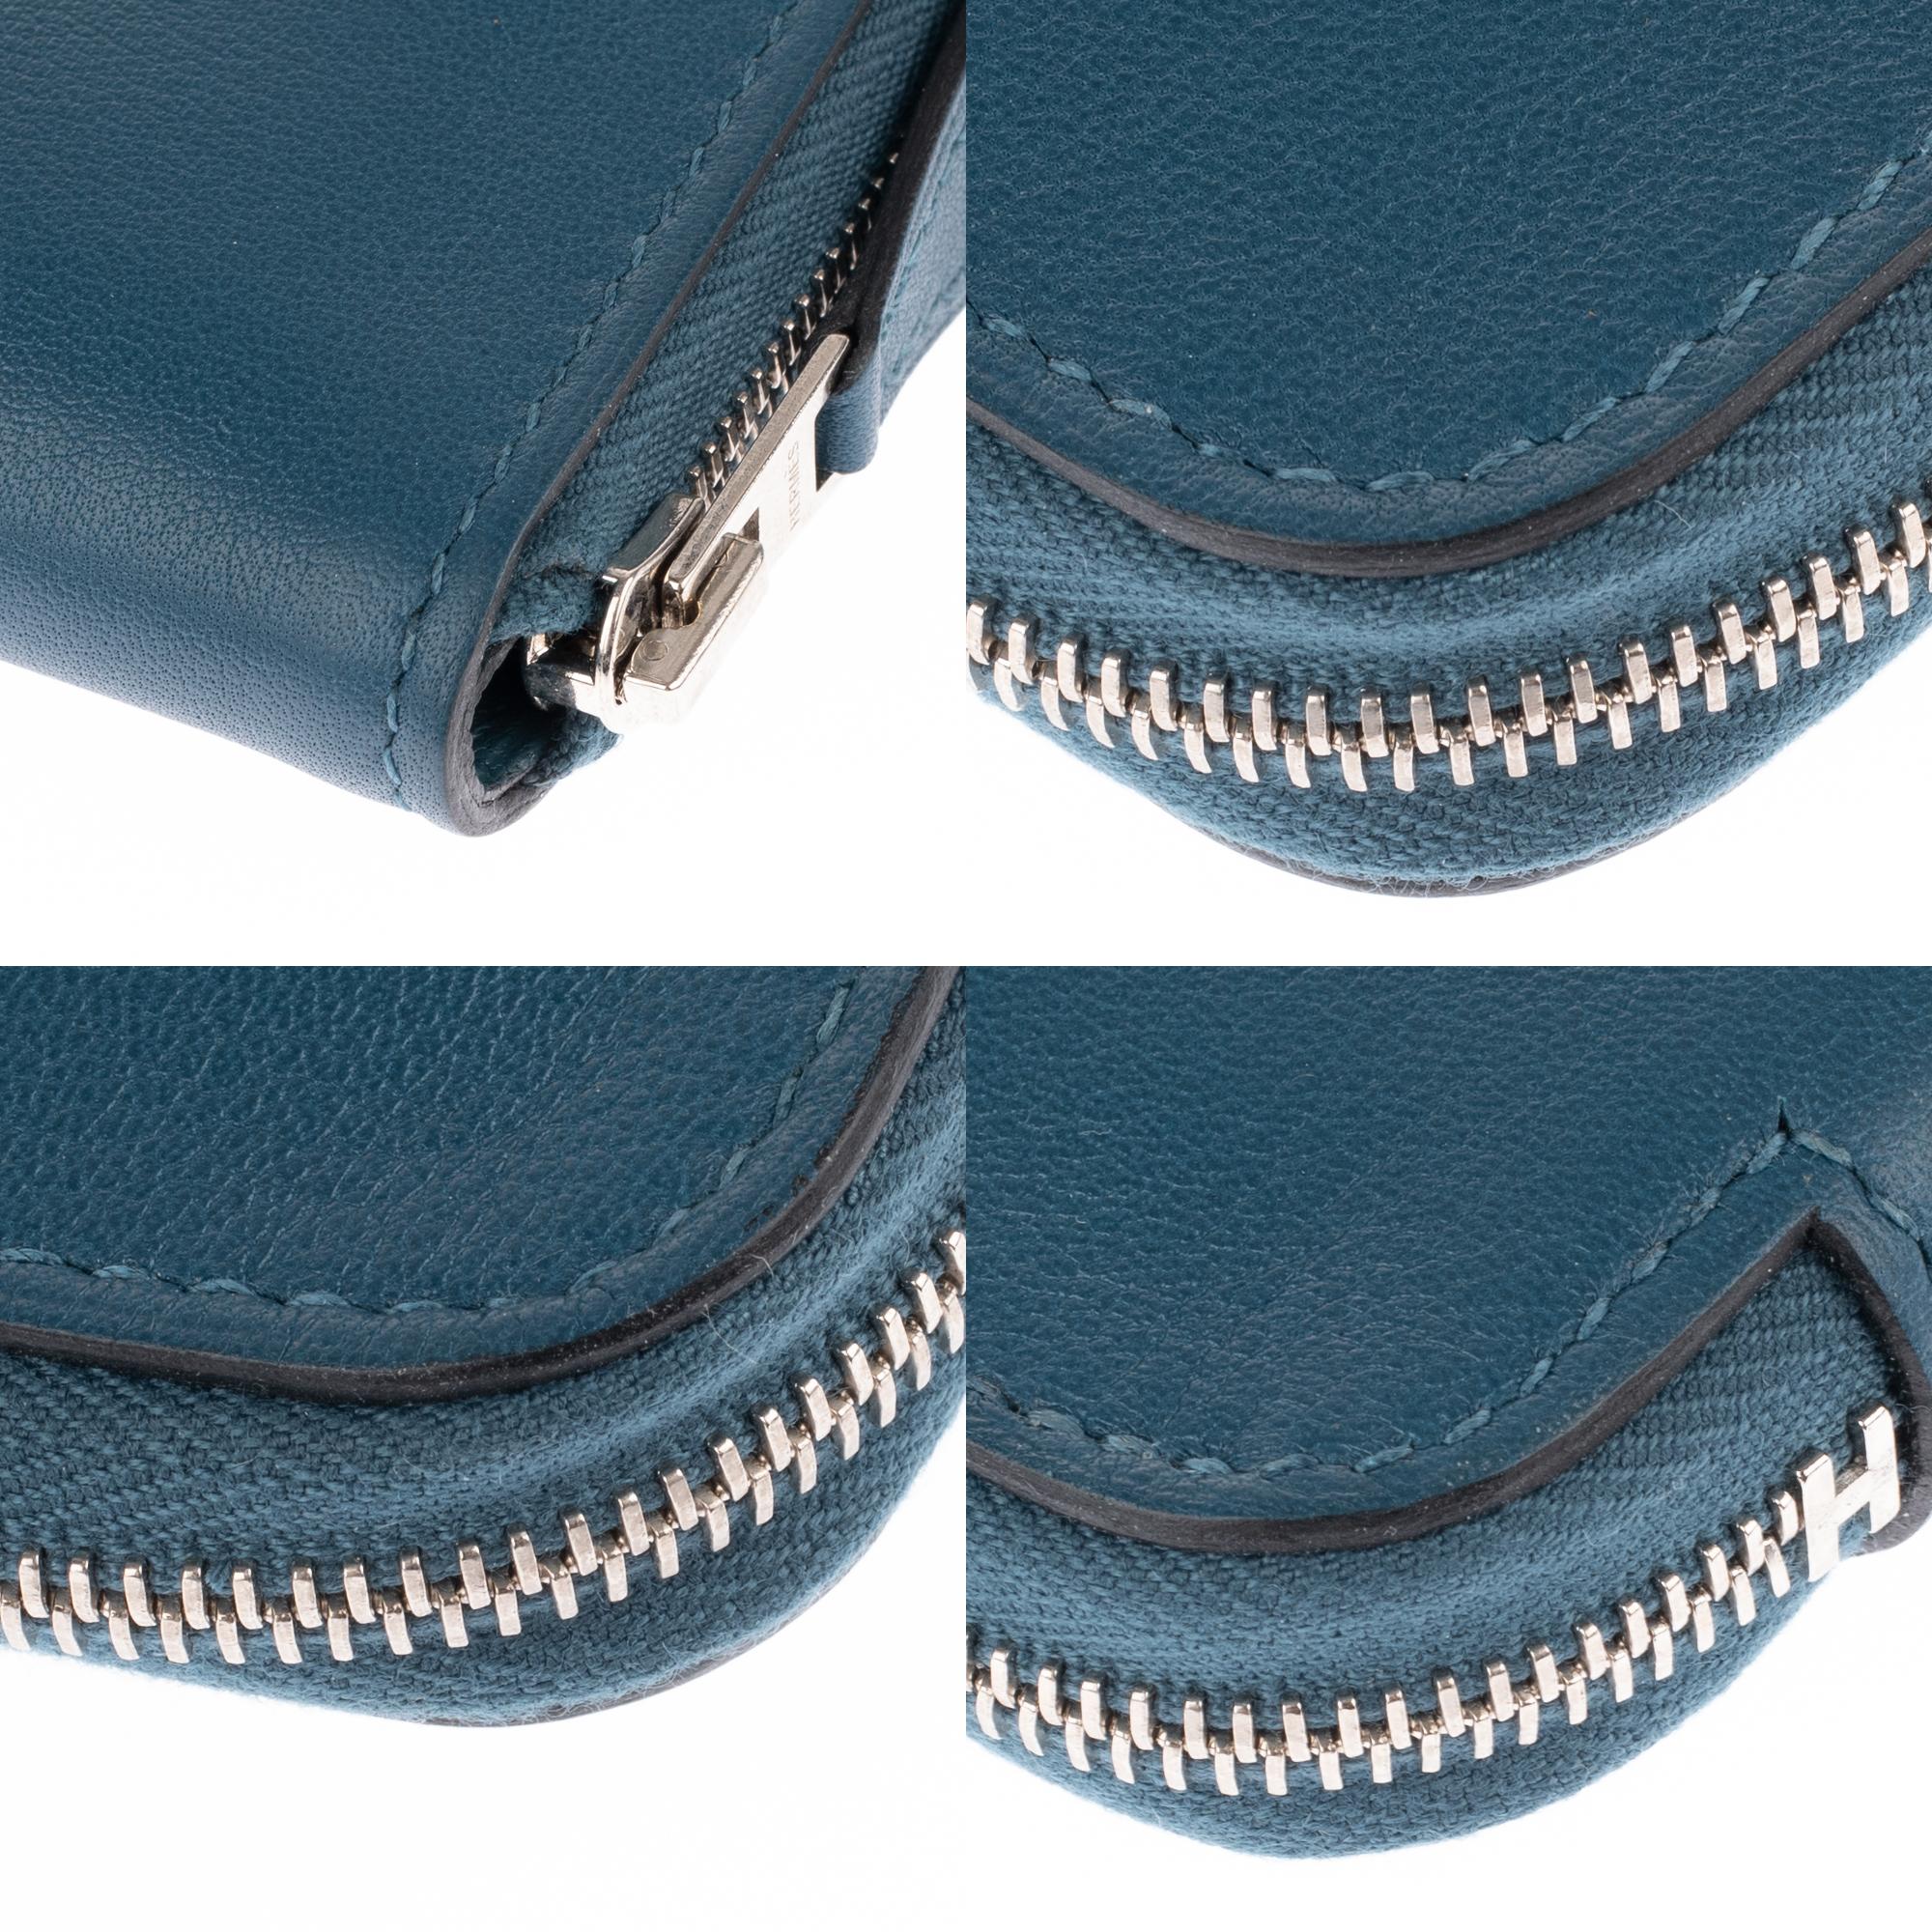 Brand New - Hermès Azap Wallet in smooth blue leather with silver hardware ! 4